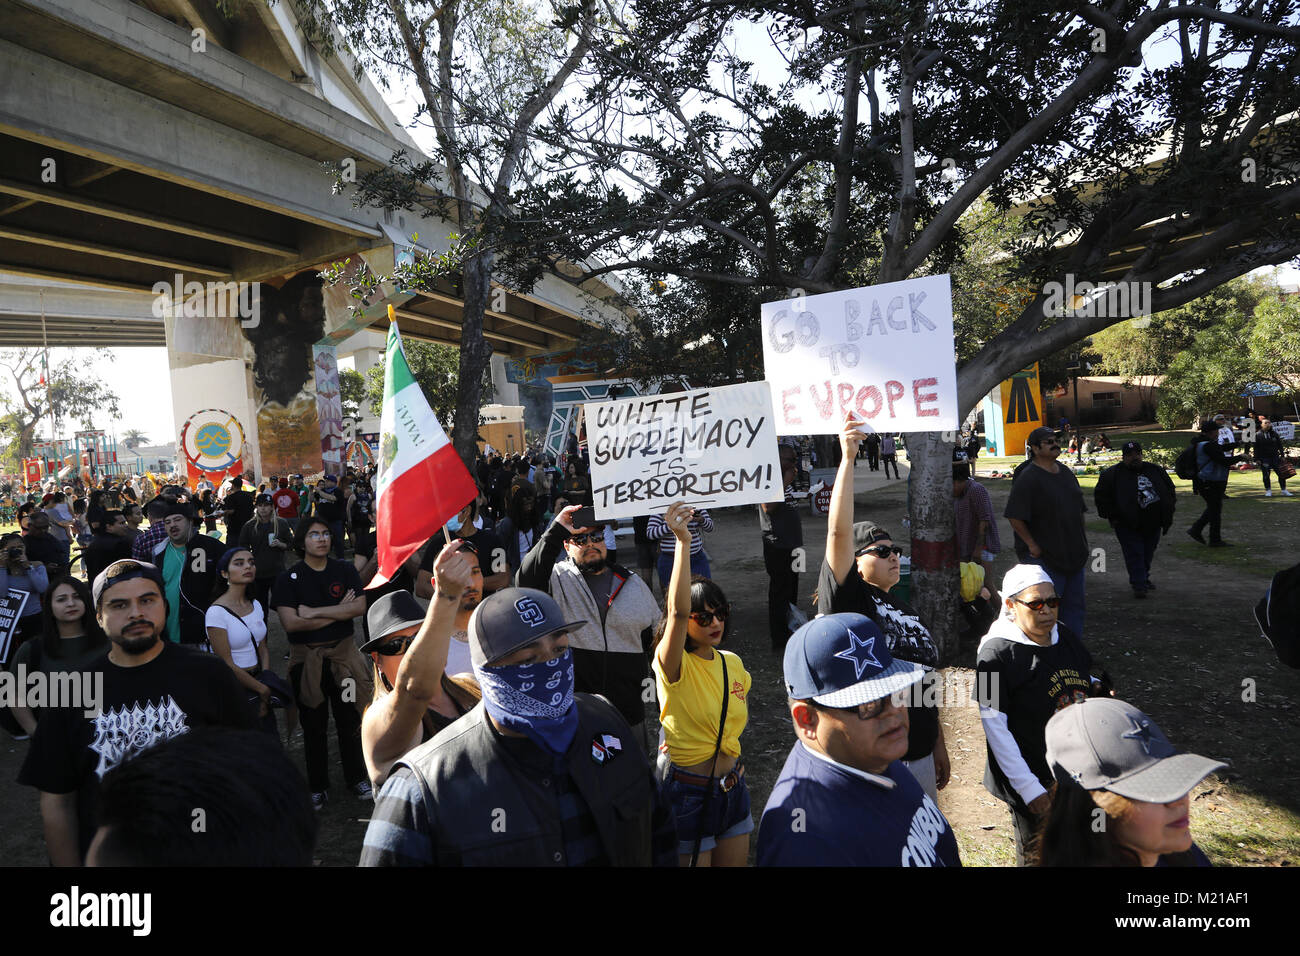 San Diego, CA, USA. 3rd Feb, 2018. Several right-wing groups aligned with the Patriotic Picnic held a few table across from Chicano Park where supporters of Chicano culture shown, rallied in the Barrio Logan neighborhood of San Diego. Credit: John Gastaldo/ZUMA Wire/Alamy Live News Stock Photo